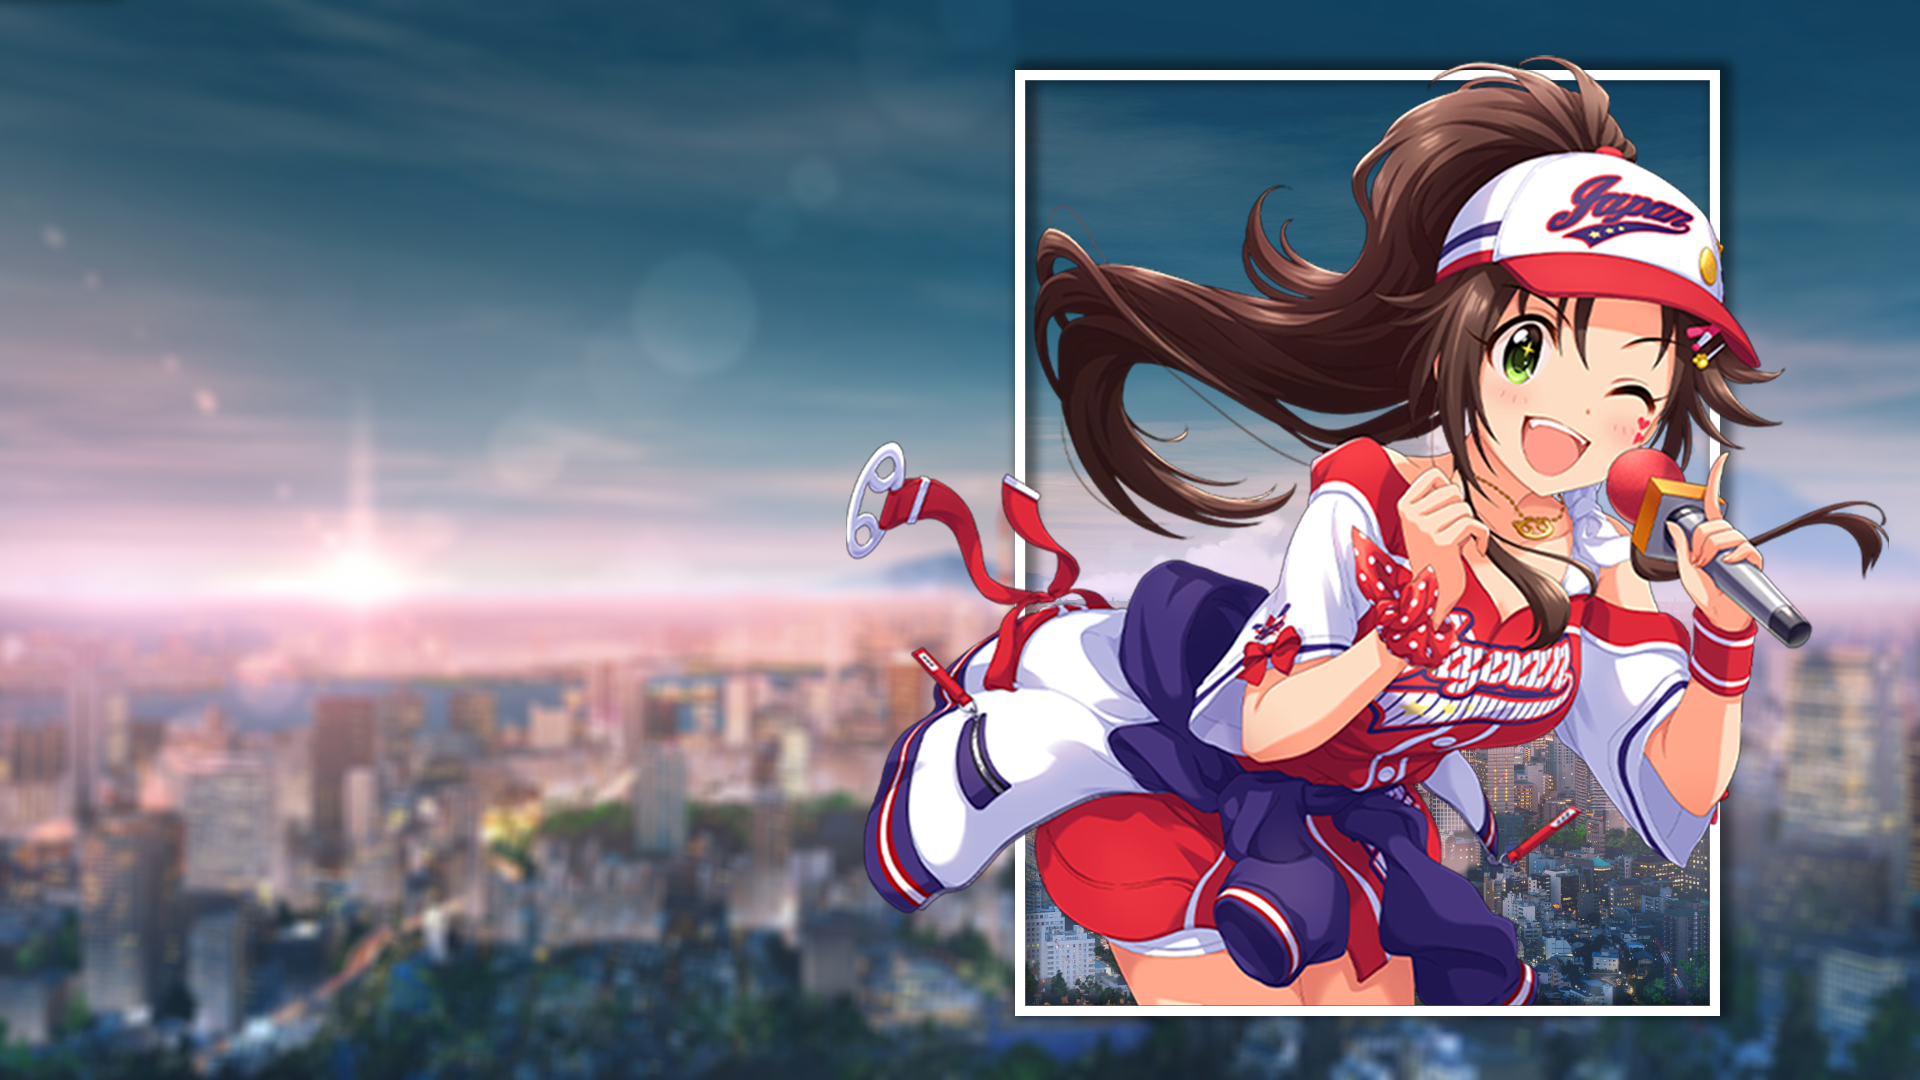 Anime 1920x1080 THE iDOLM@STER: Cinderella Girls city picture-in-picture anime girls